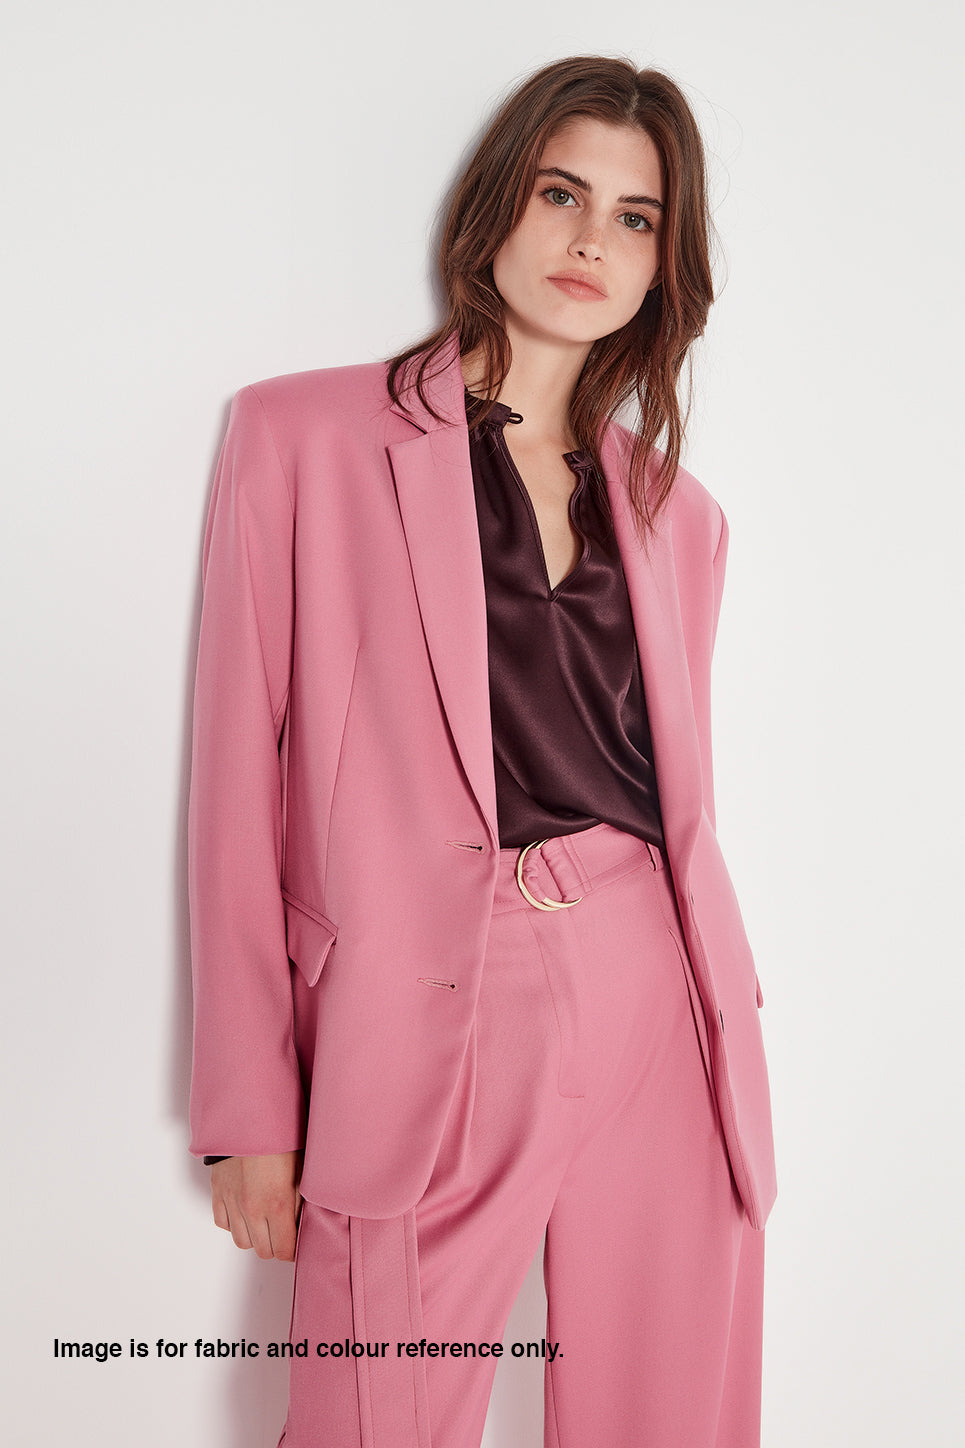 The Whitman Jacket in Peony